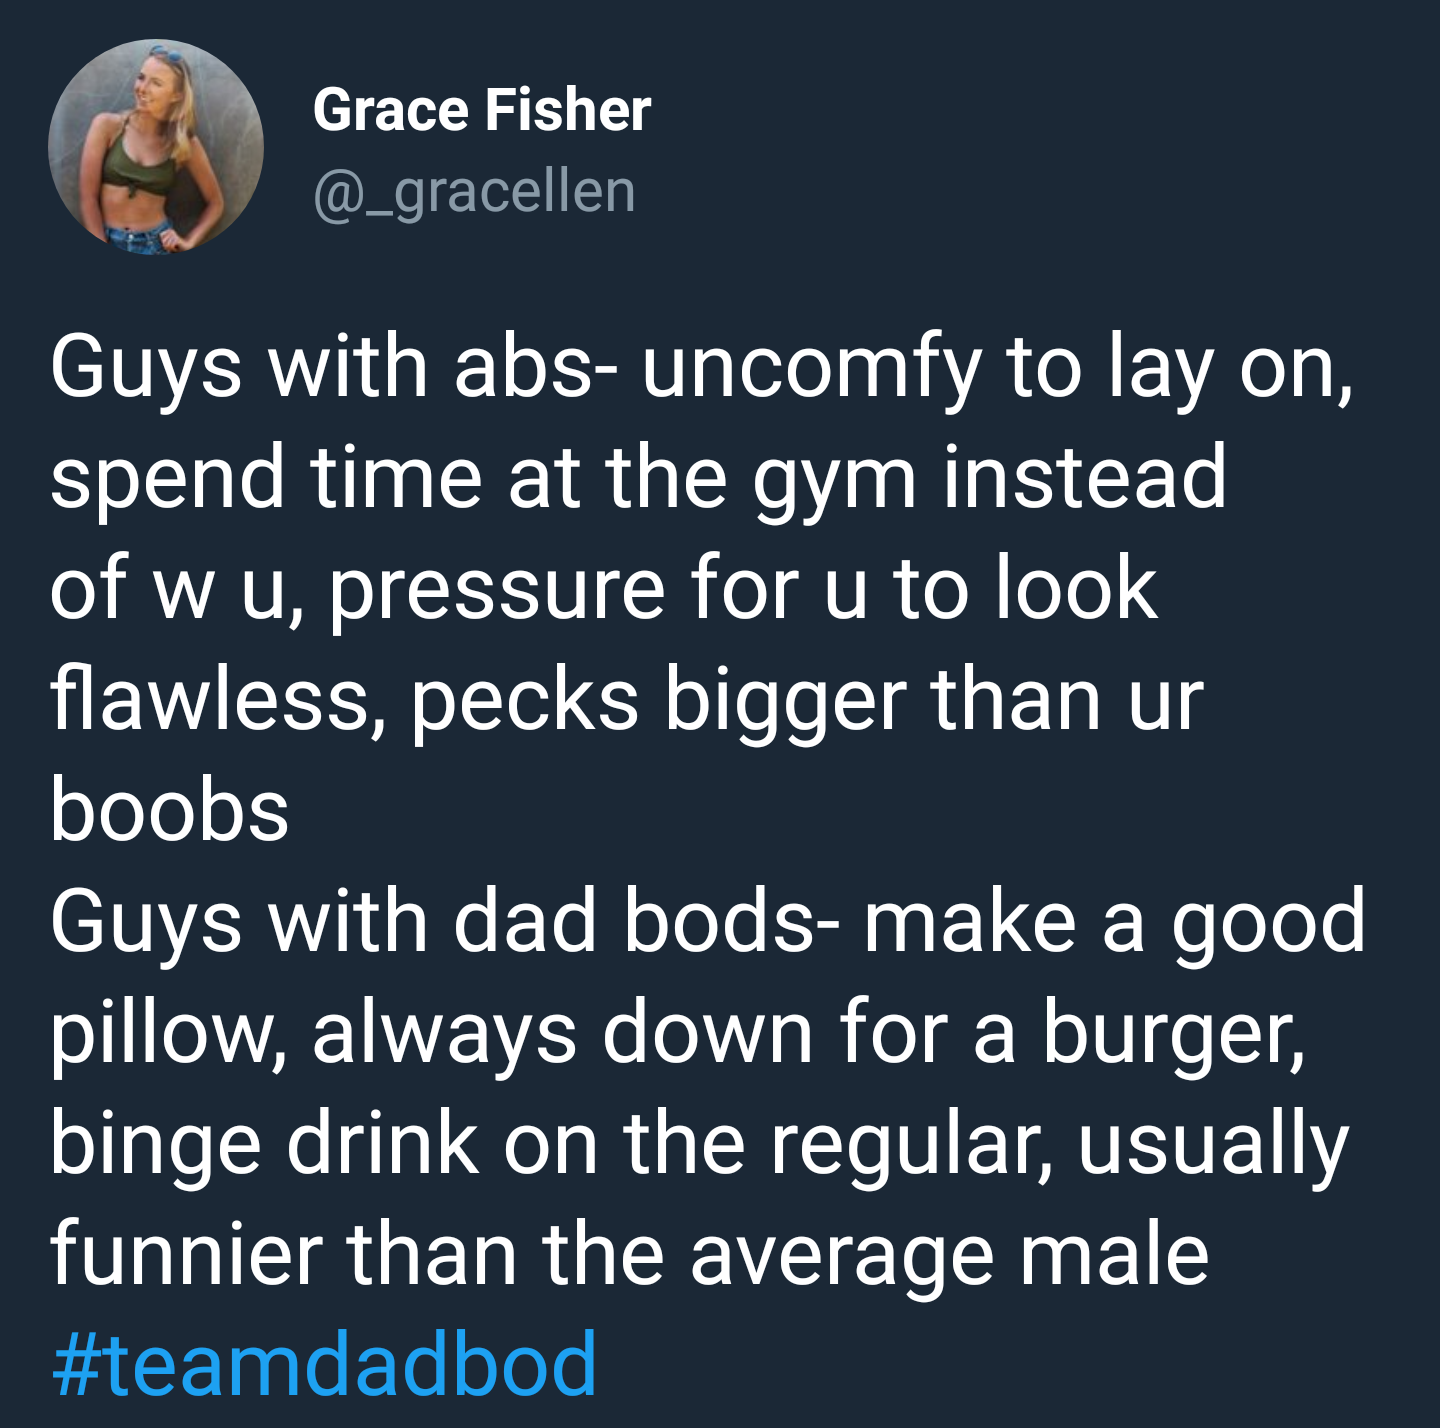 Grace Fisher Guys with abs uncomfy to lay on, spend time at the gym instead of w u, pressure for u to look flawless, pecks bigger than ur boobs Guys with dad bods make a good pillow, always down for a burger, binge drink on the regular, usually funnier…